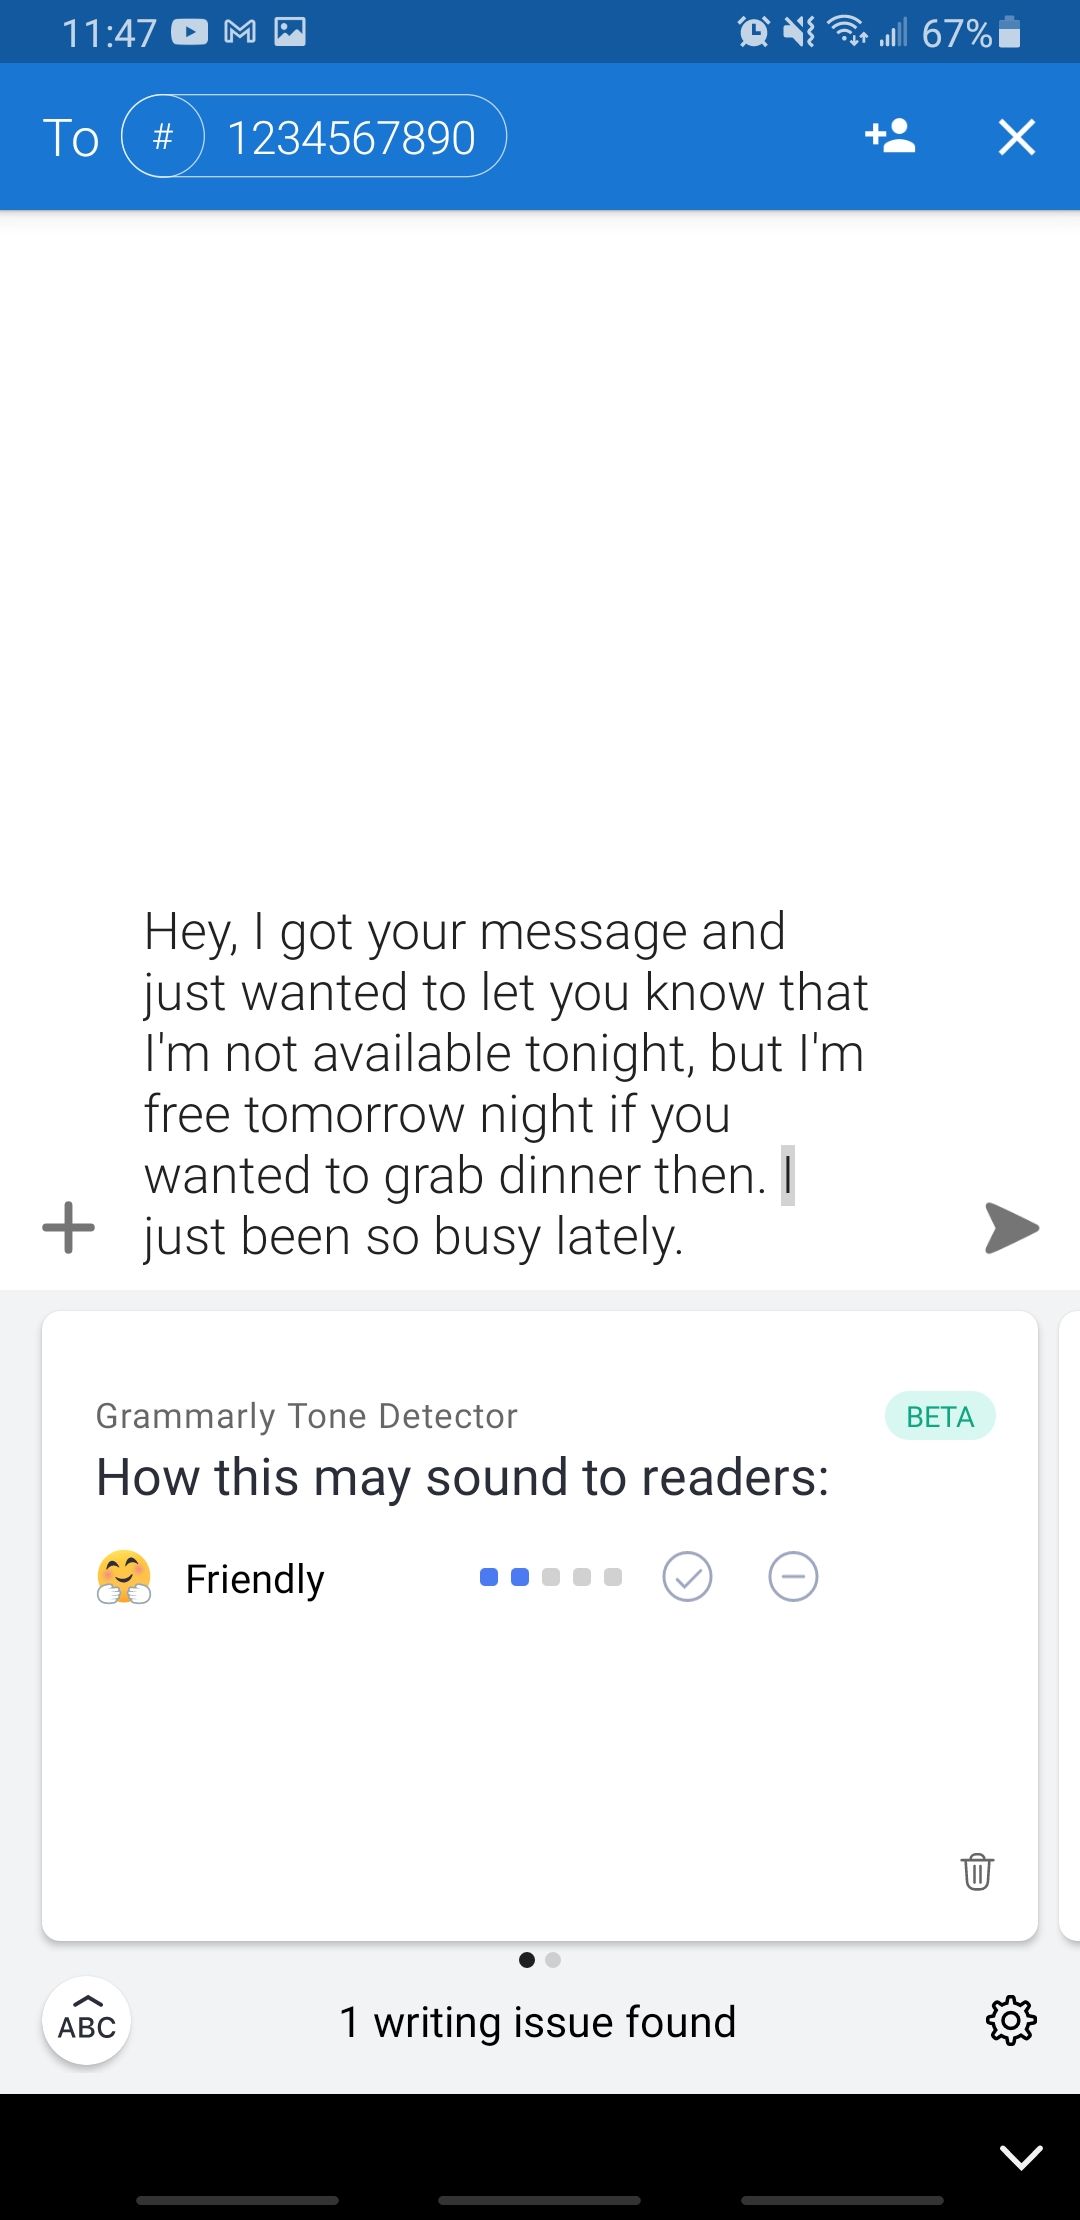 grammarly app detecting a friendly tone